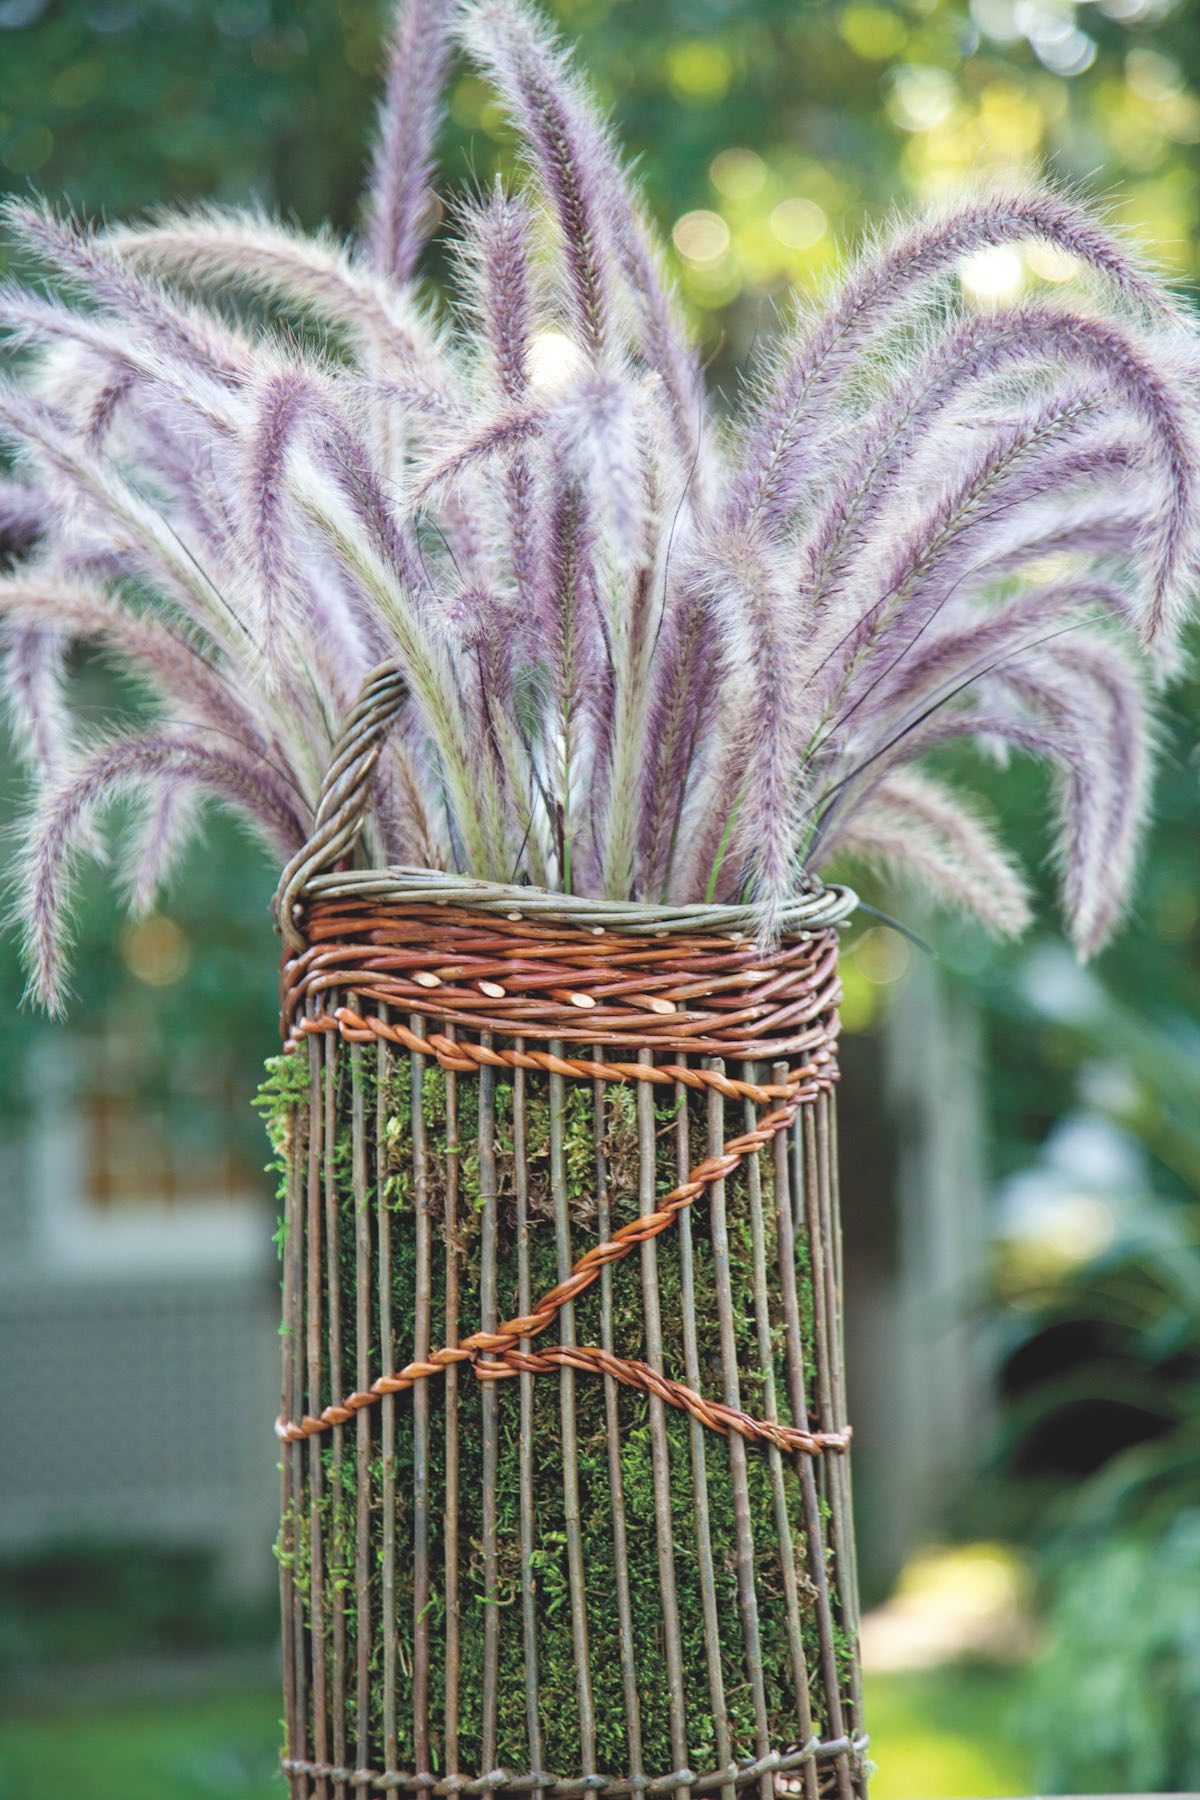 A simple gathering of fountain grass spilling from a basket